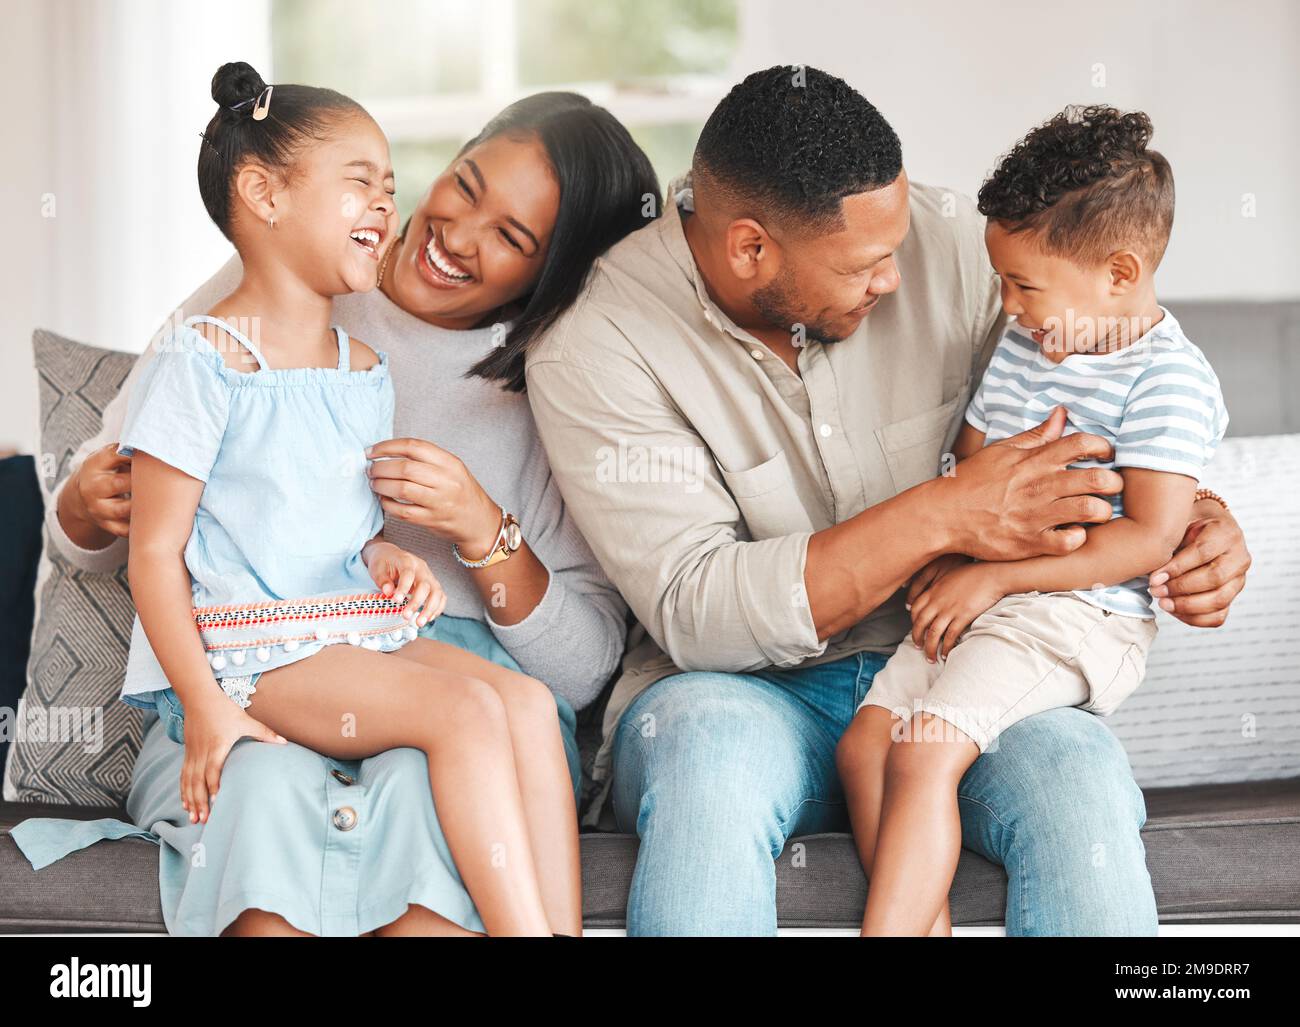 Fun with giggles. a young family playing together on a sofa at home. Stock Photo